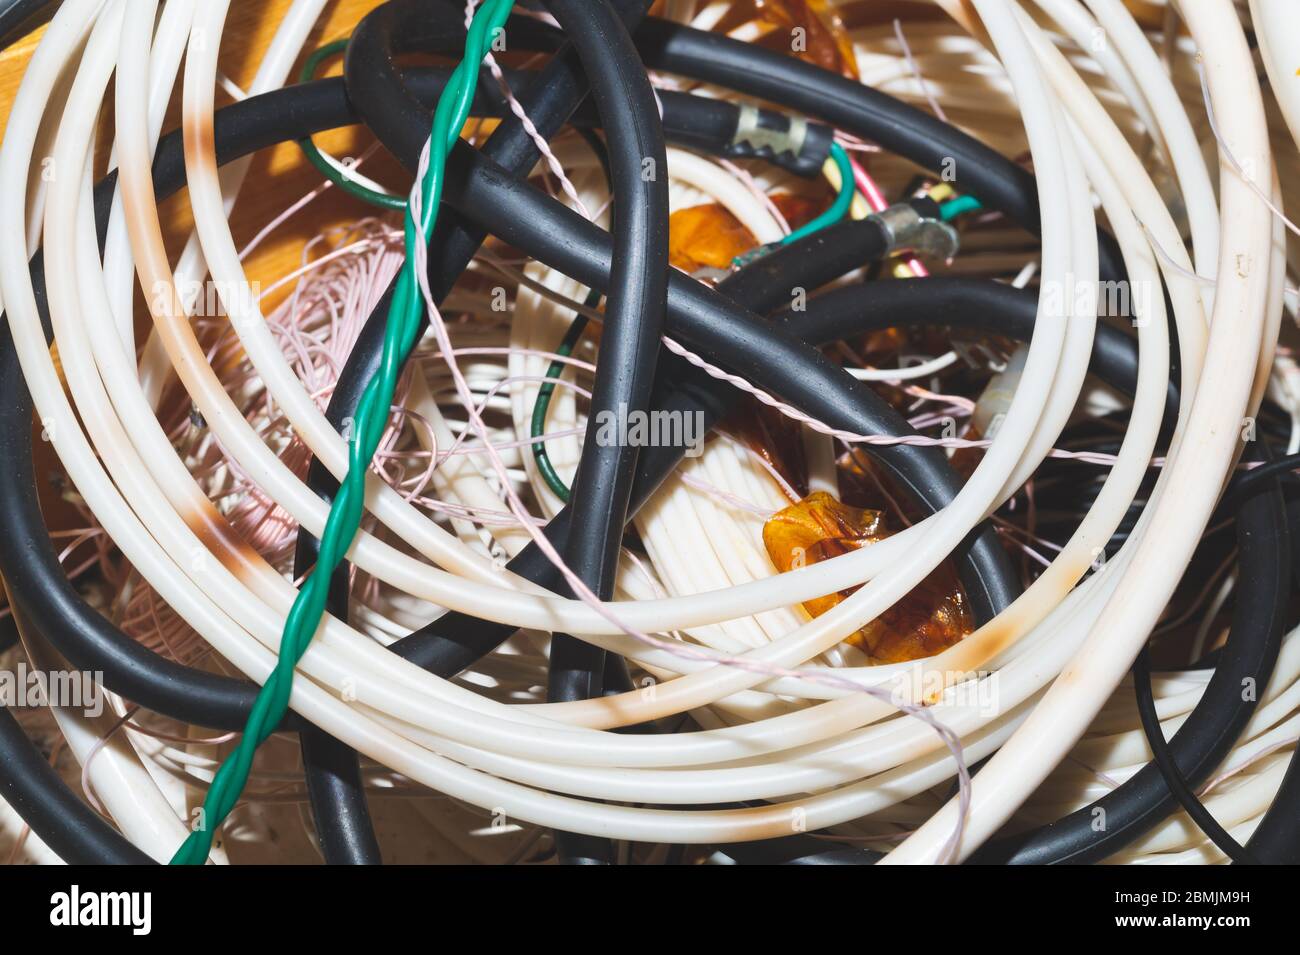 Old hoses and wires close up. twisted hosepipe. gardening equipment Stock Photo